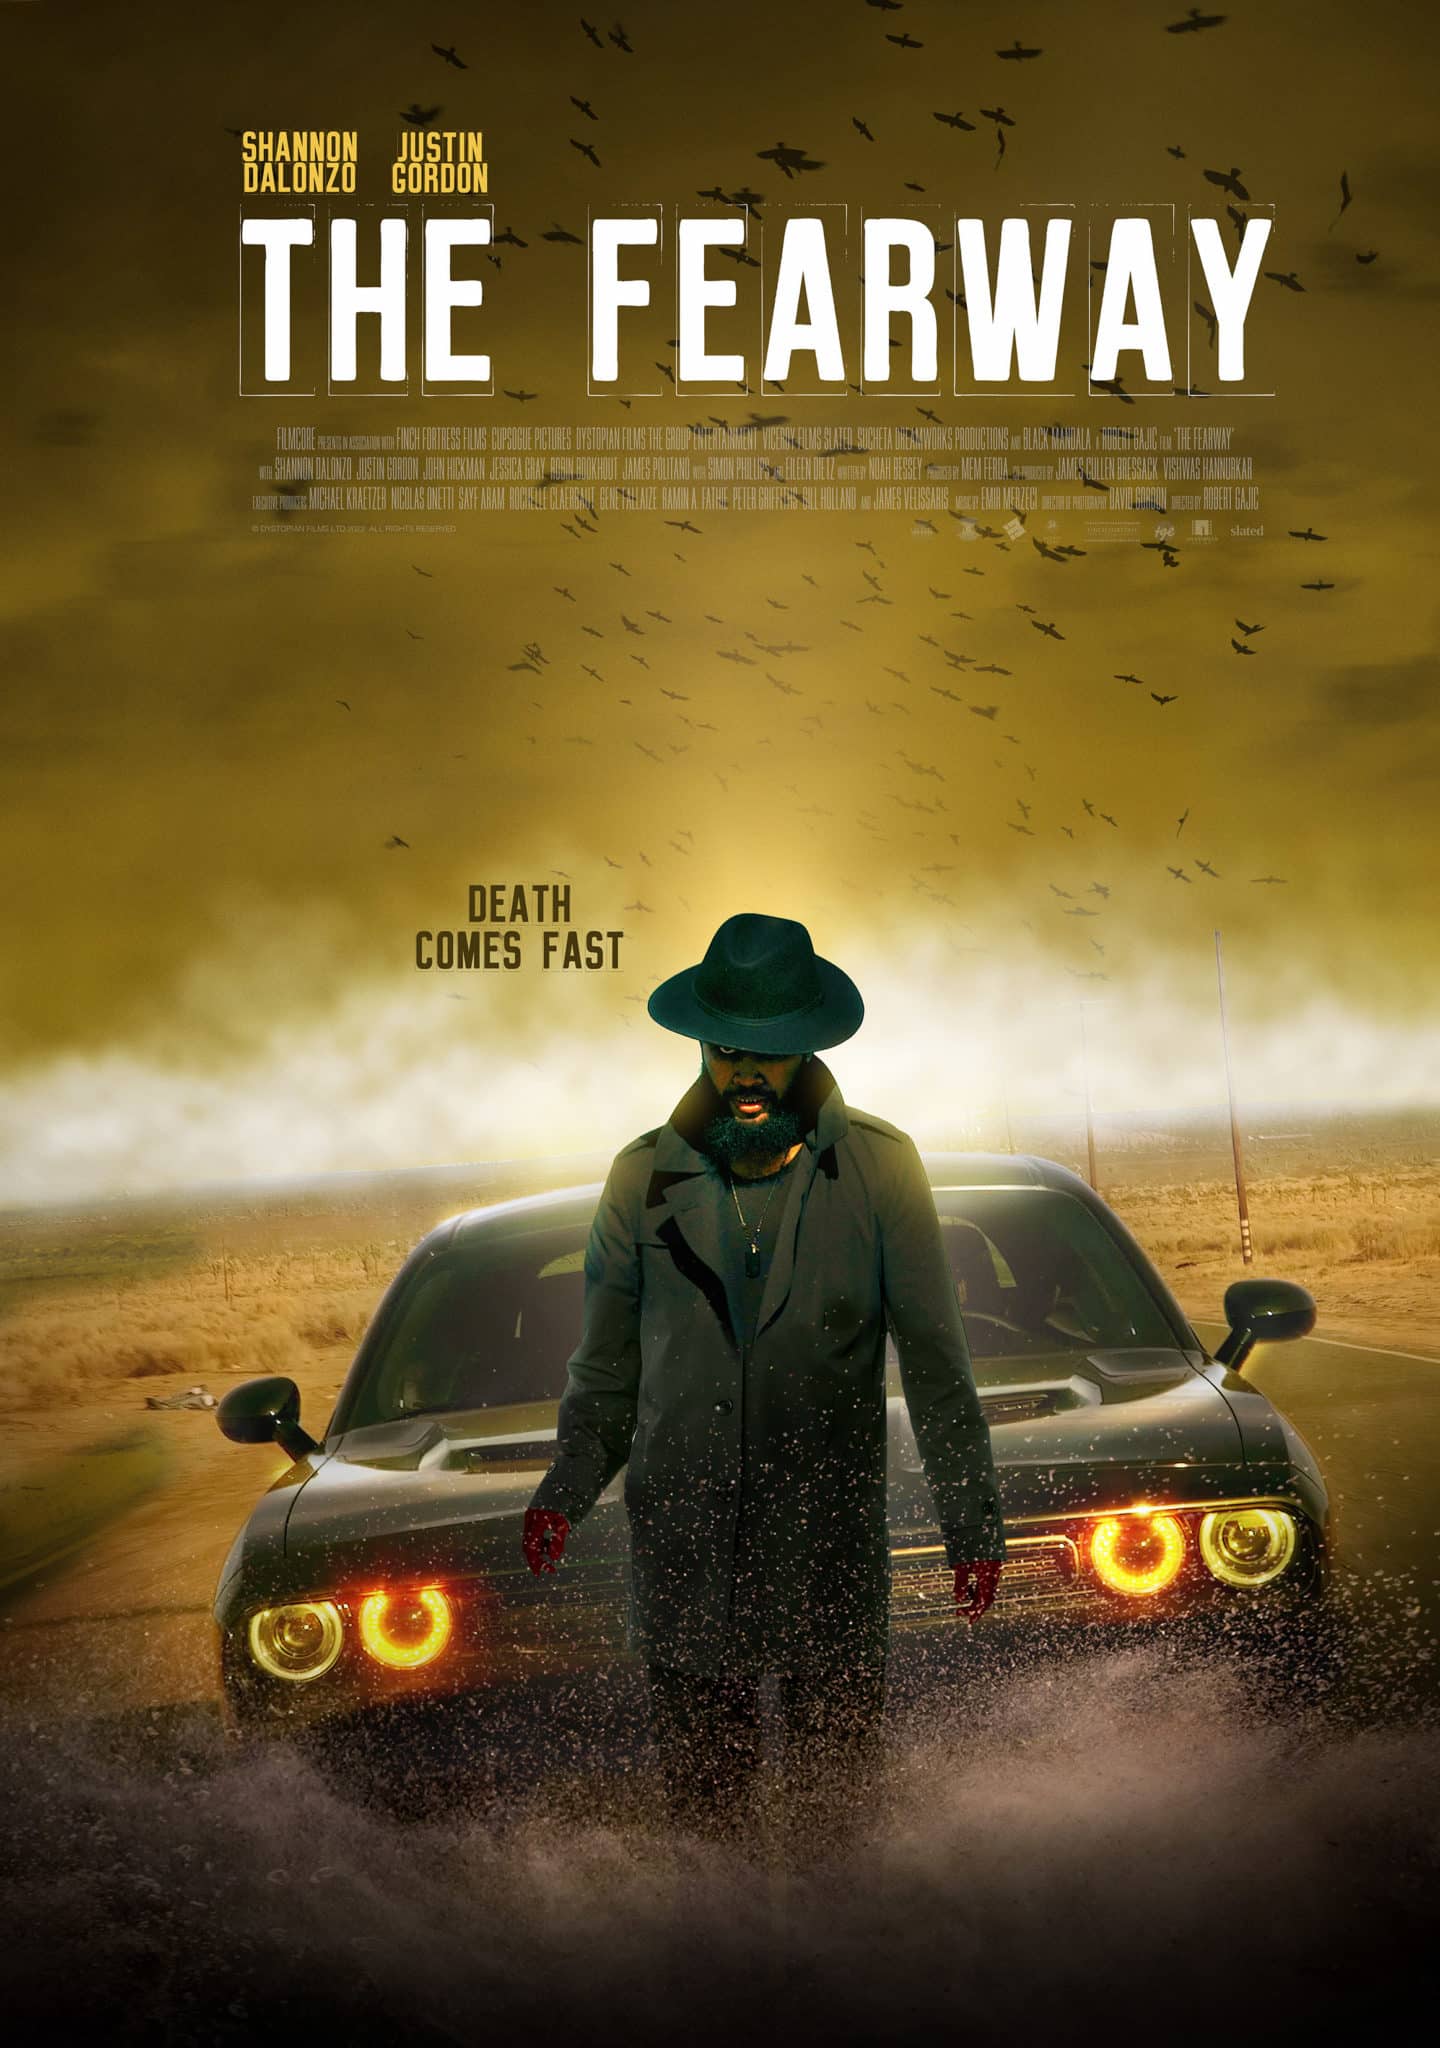 The Fearway - Teaser Poster